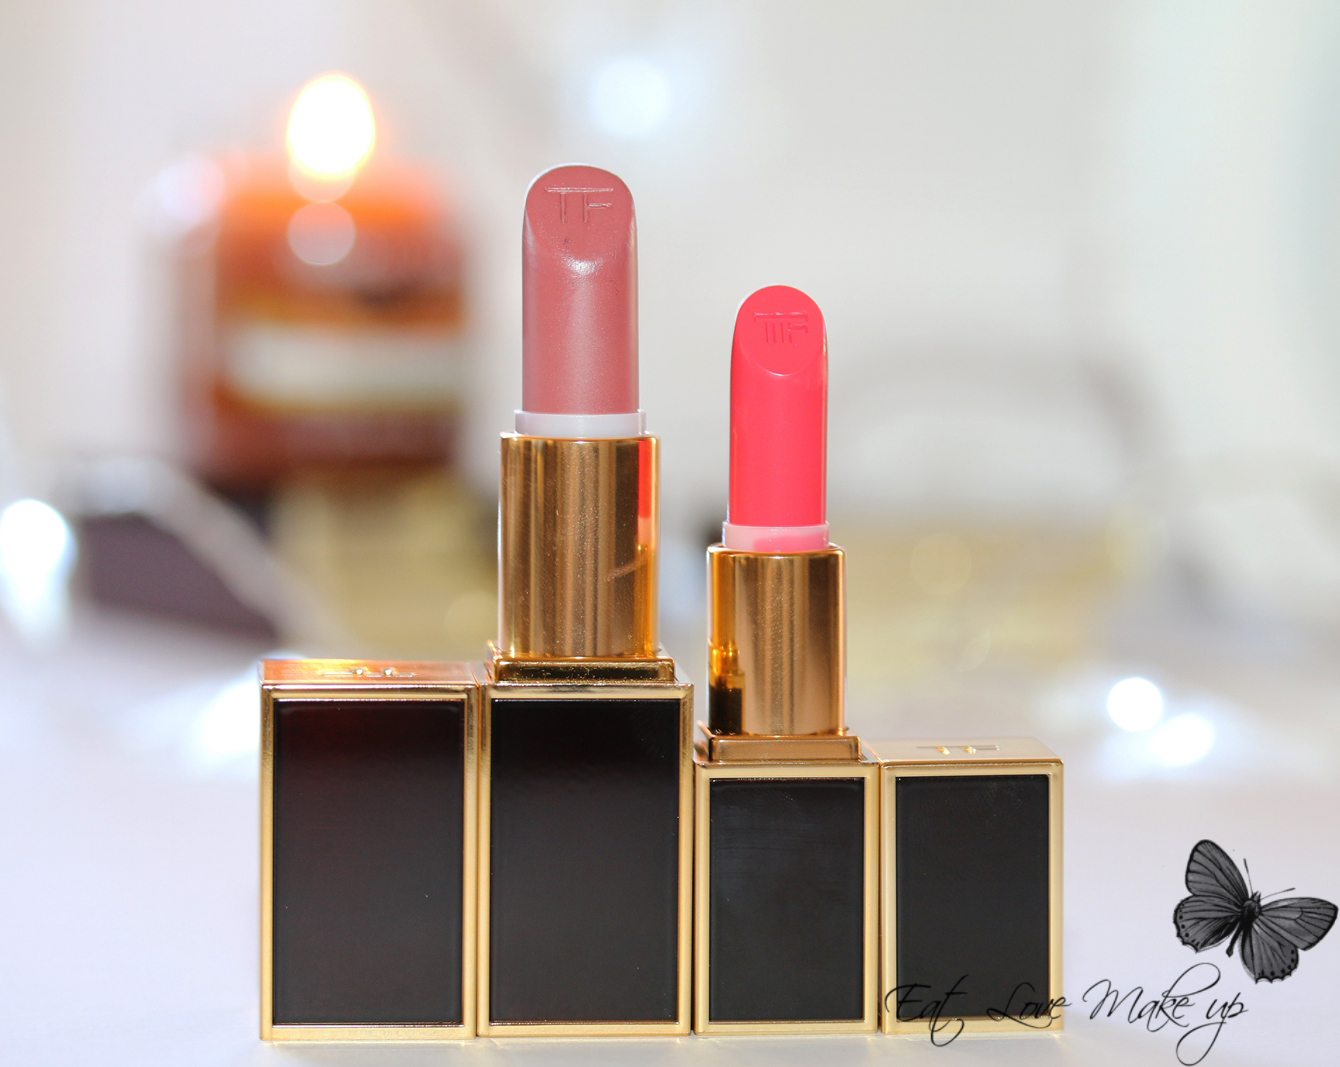 Tom Ford Lips & Boys Collection